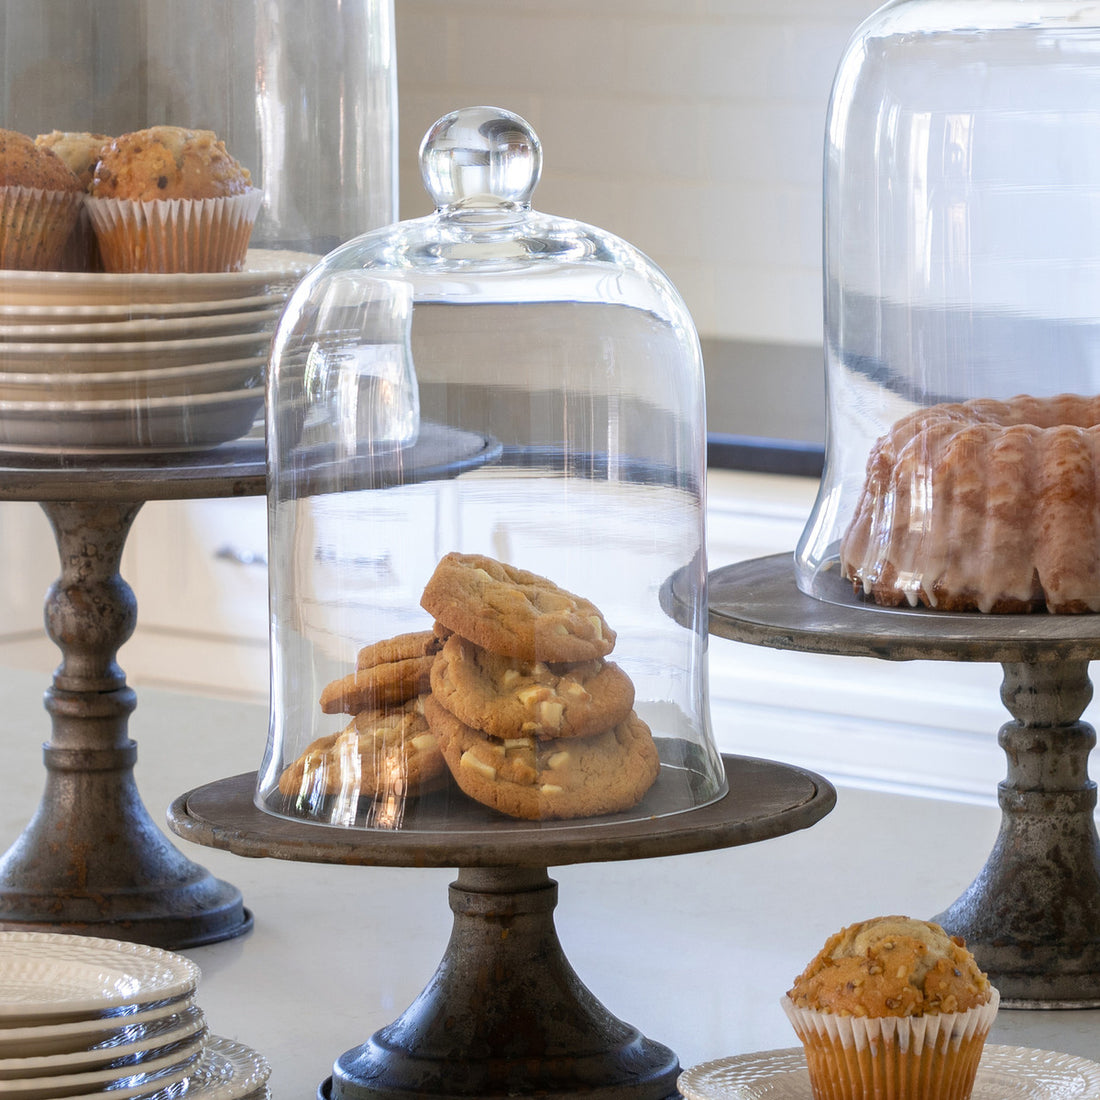 Glass-domed Park Hill cake stands, resembling bell jars, displaying baked goods on a table.